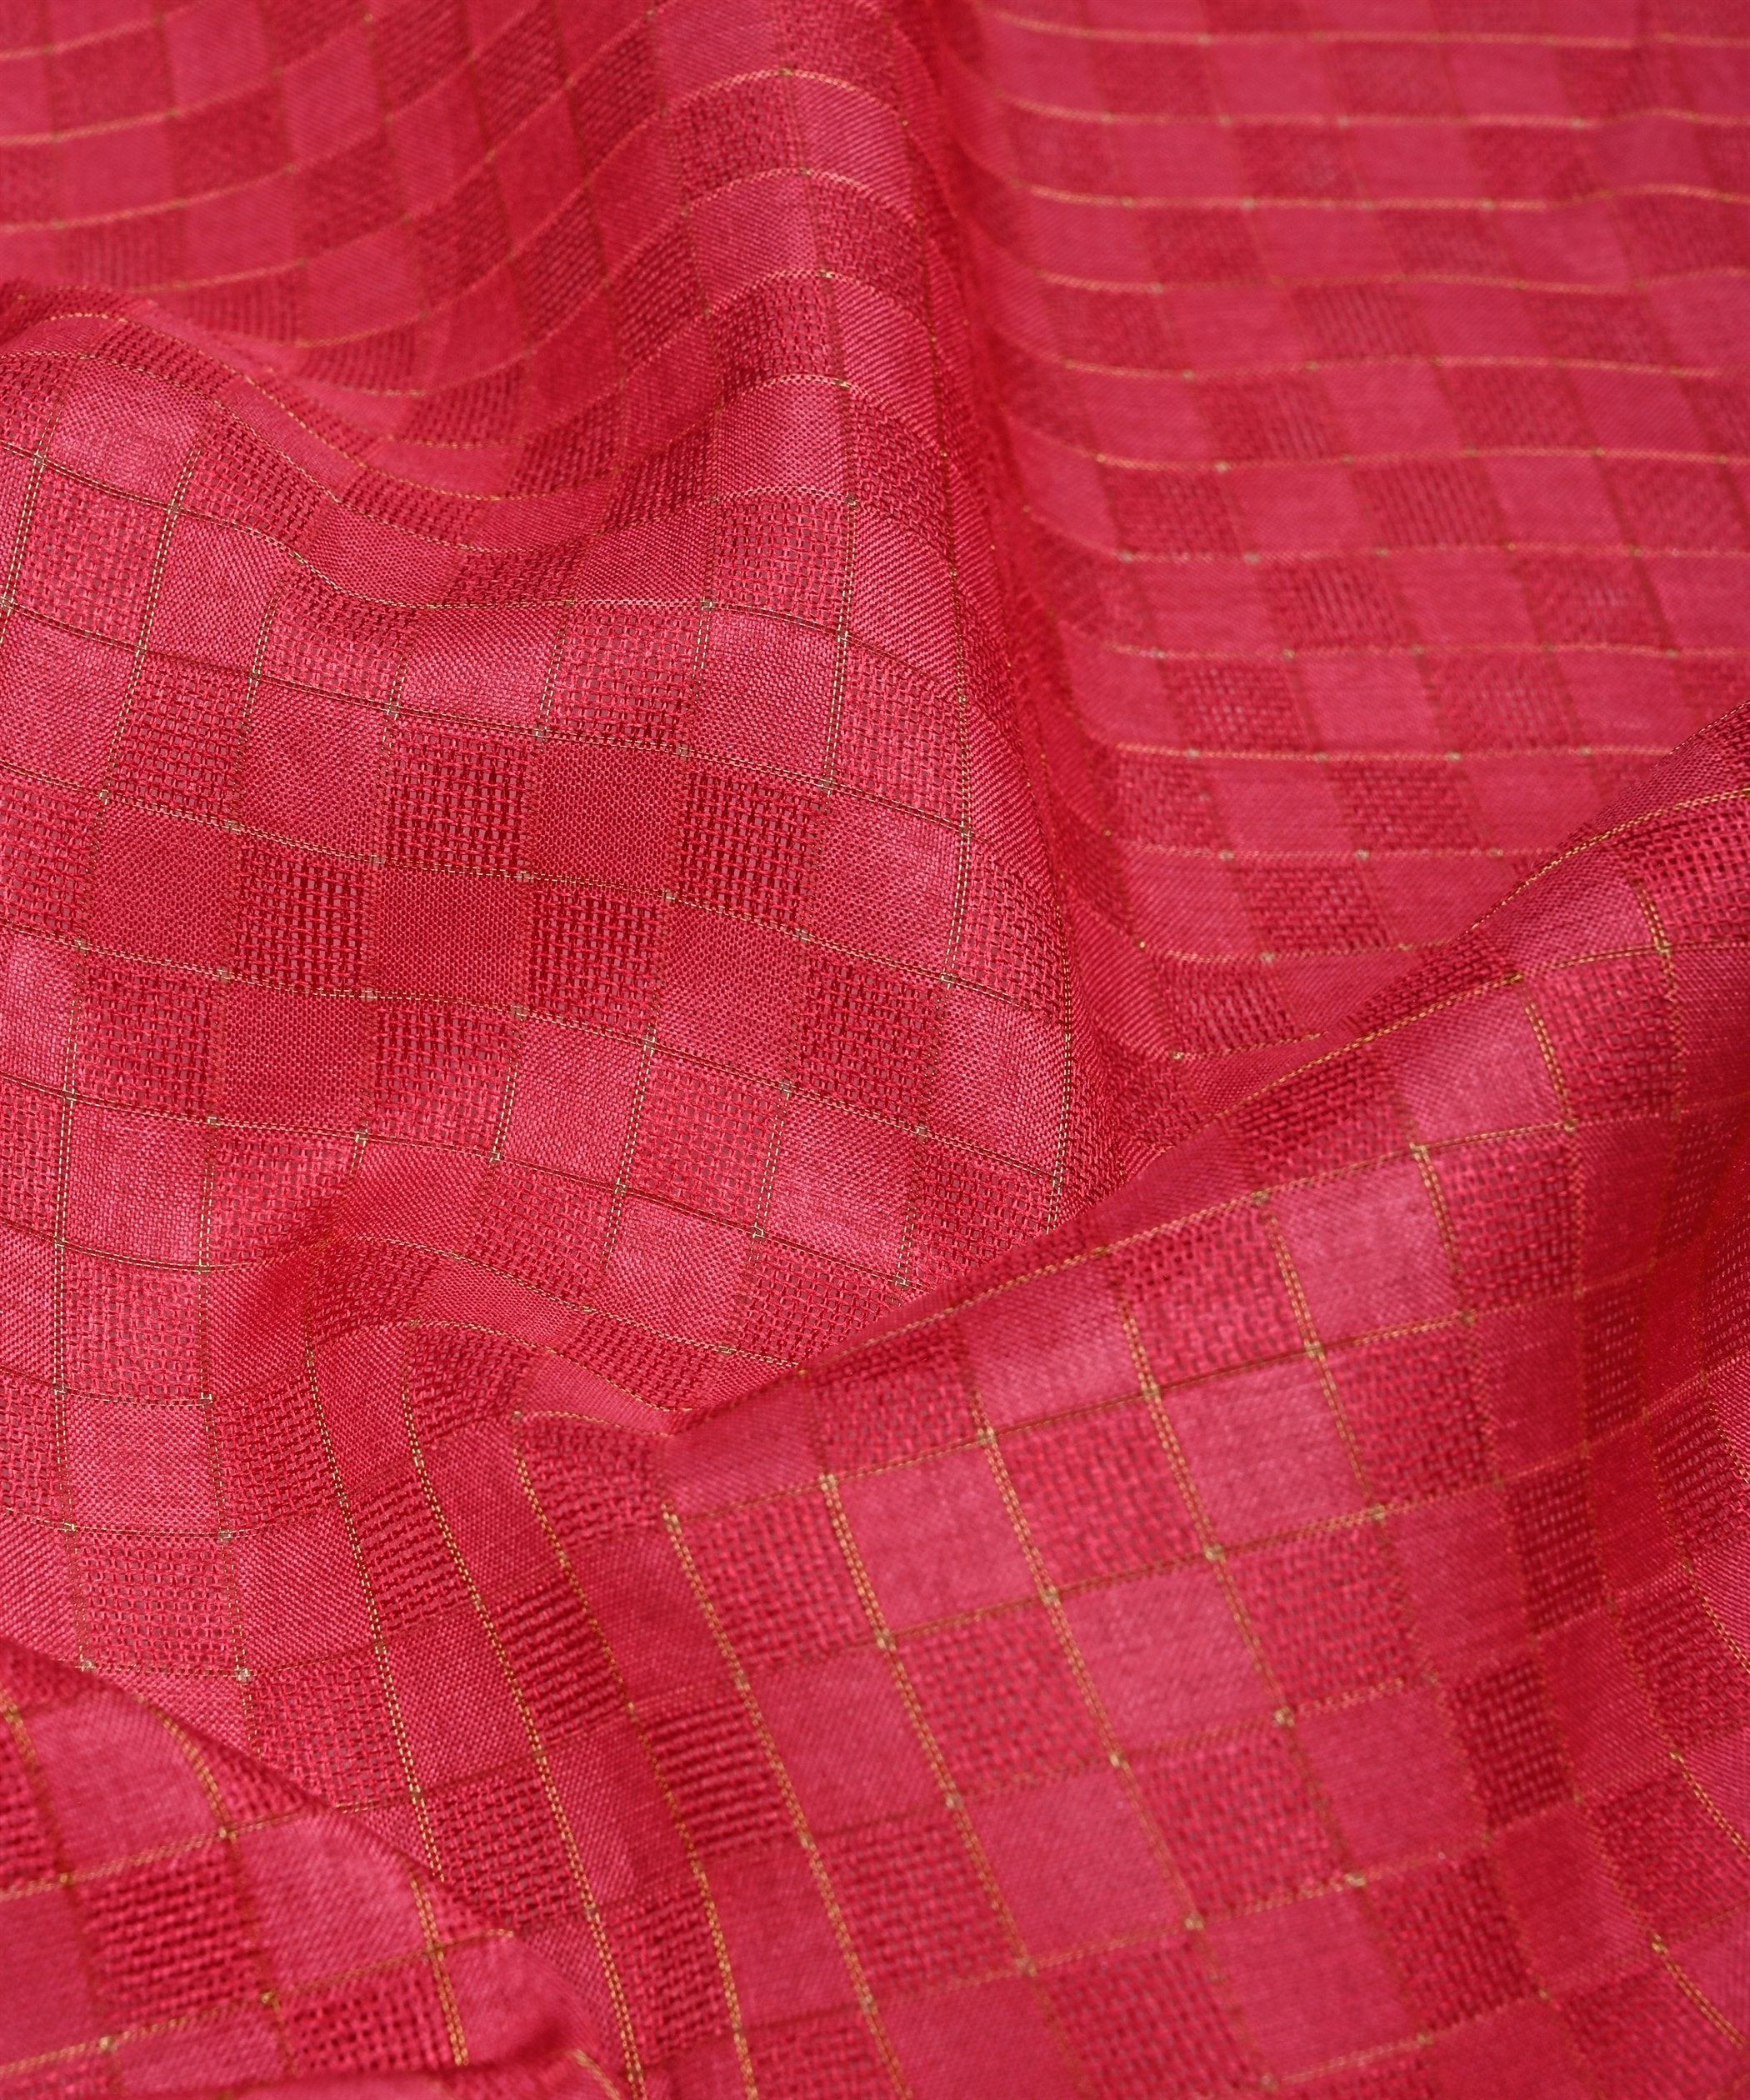 Pink Jute fabric with Checks